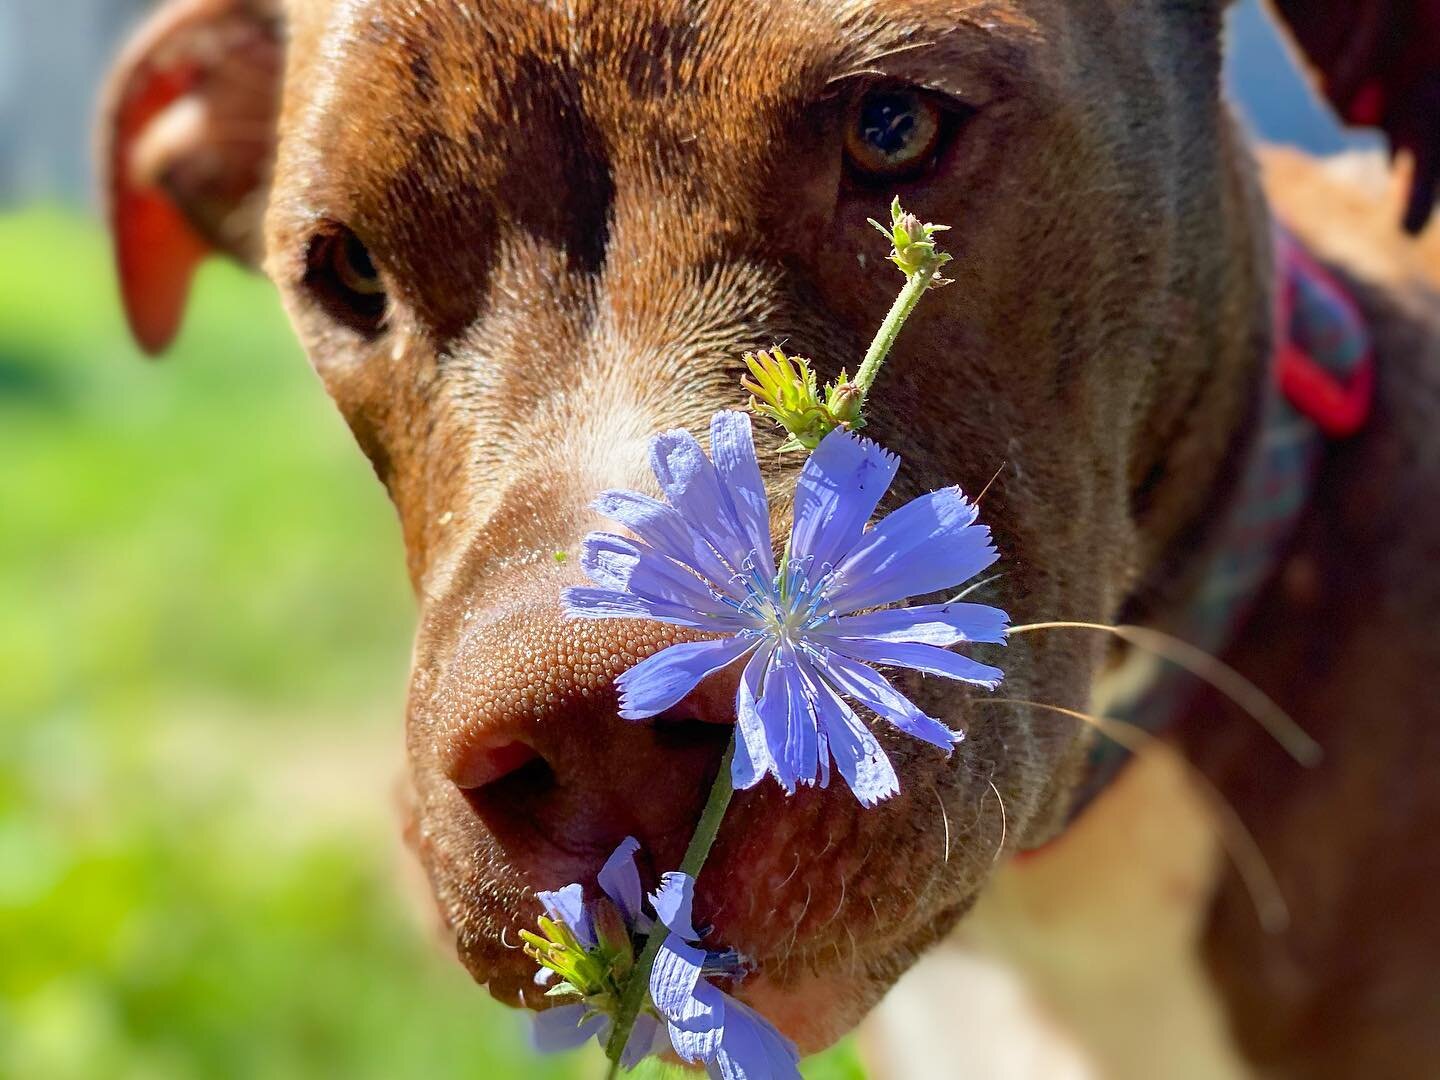 Take a few minutes today to go outside and explore the flowers like Benji. 
It will be worth it. #wisdomwednesday